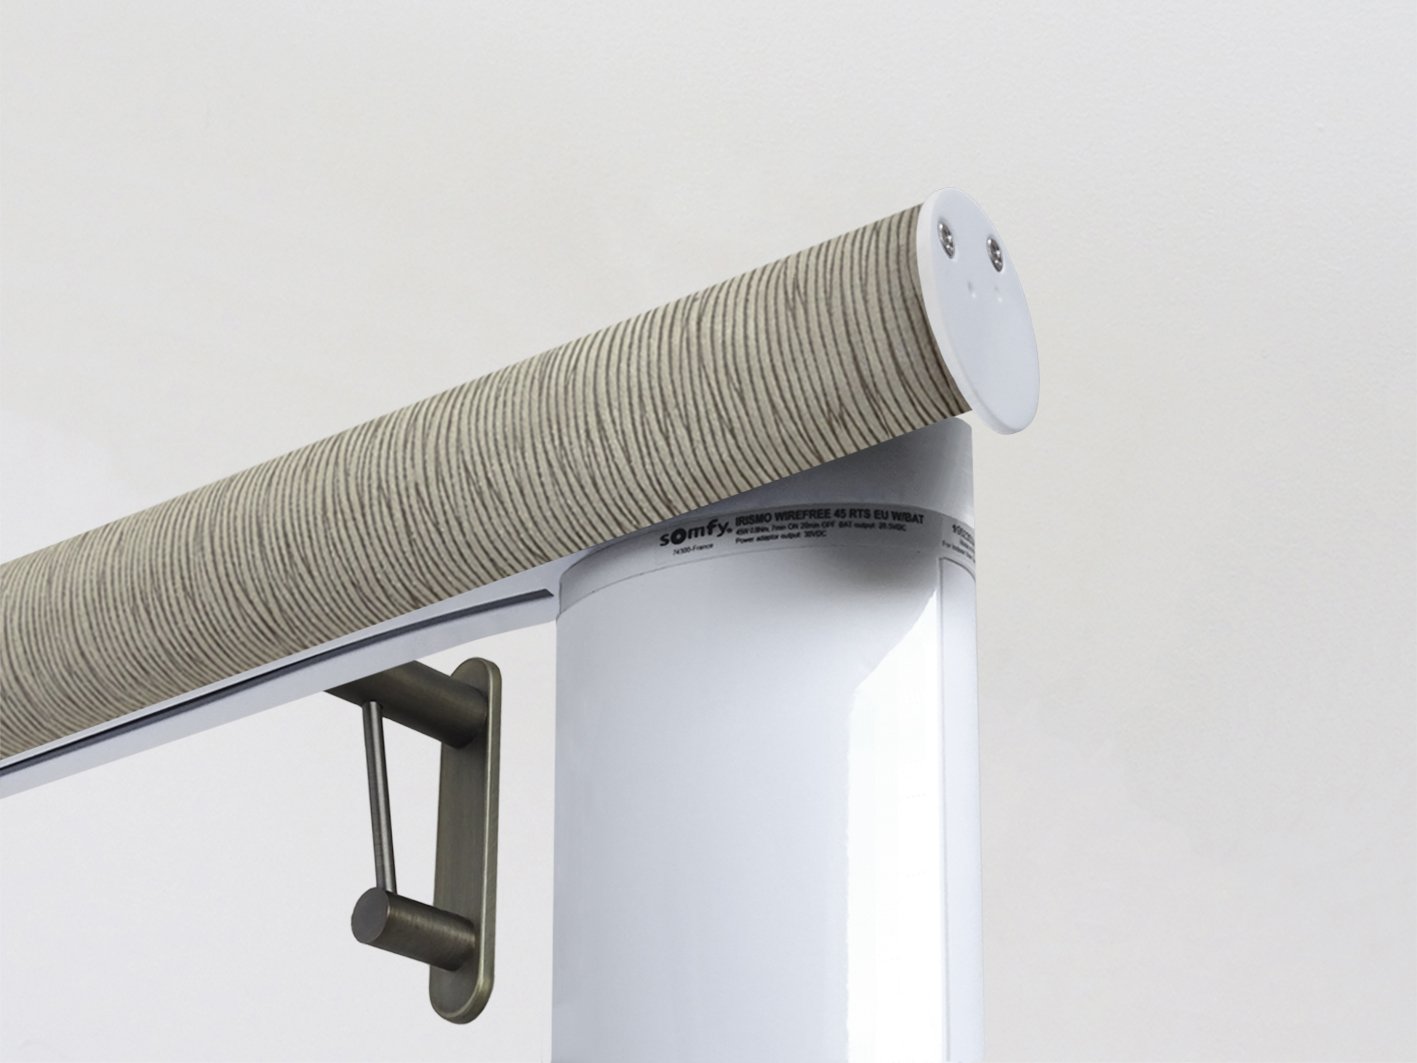 Motorised electric curtain pole in shale green, wireless & battery powered using the Somfy Glydea track | Walcot House UK curtain pole specialists